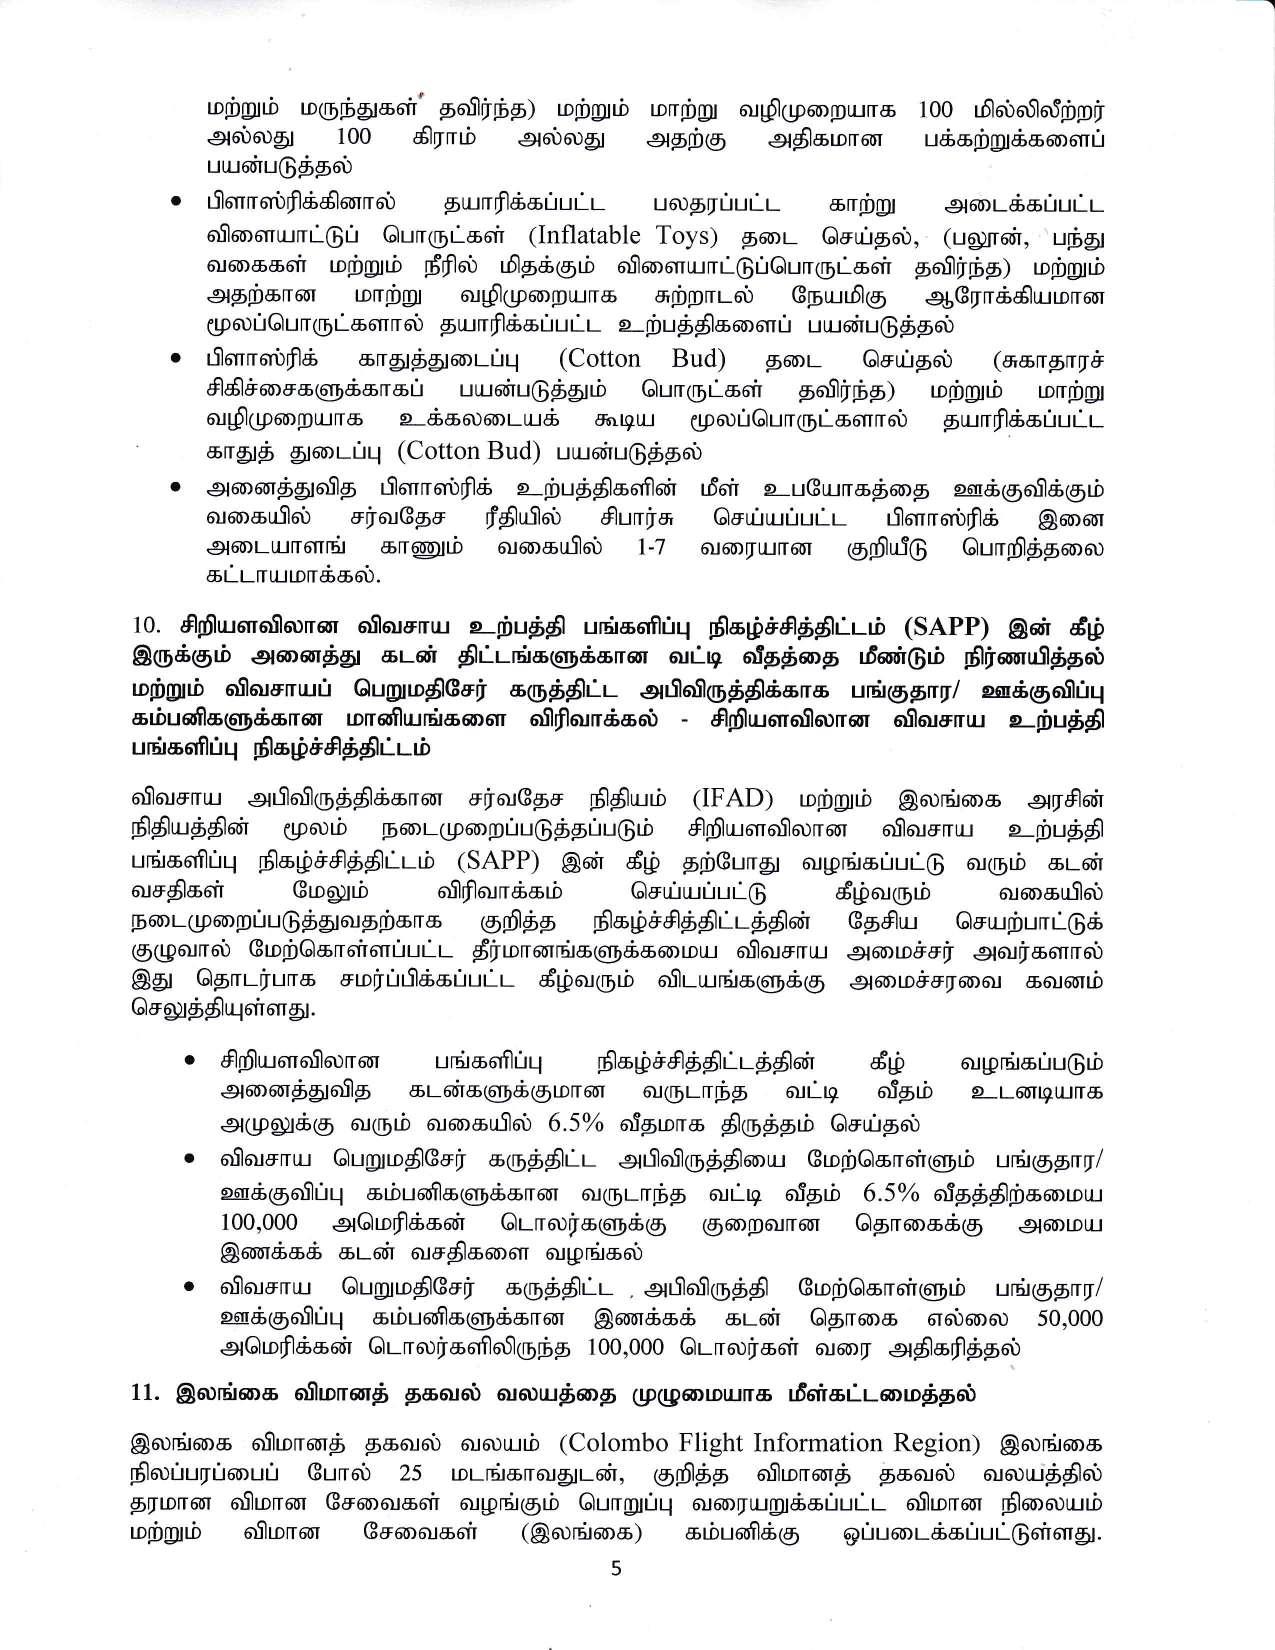 Cabinet Decision on 19.10.2020 Tamil compressed page 005